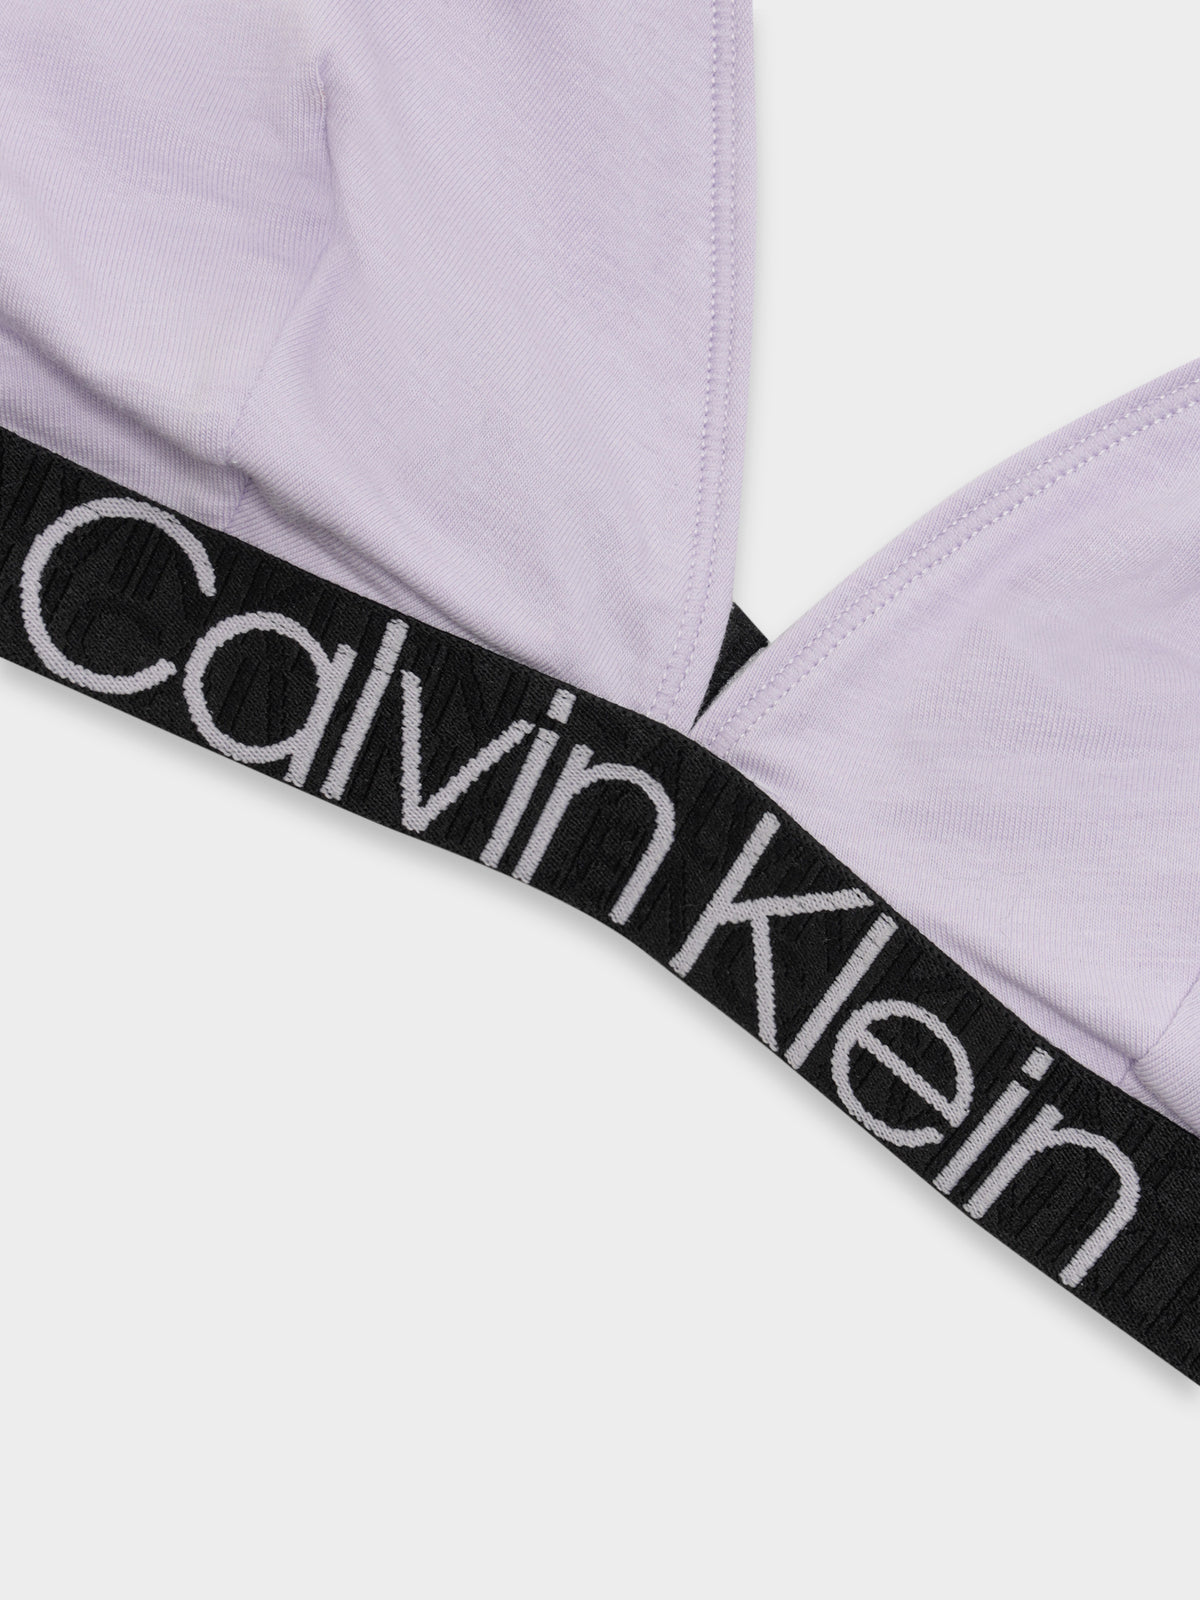 Reconsidered Comfort Triangle Bra in Ambient Lavender